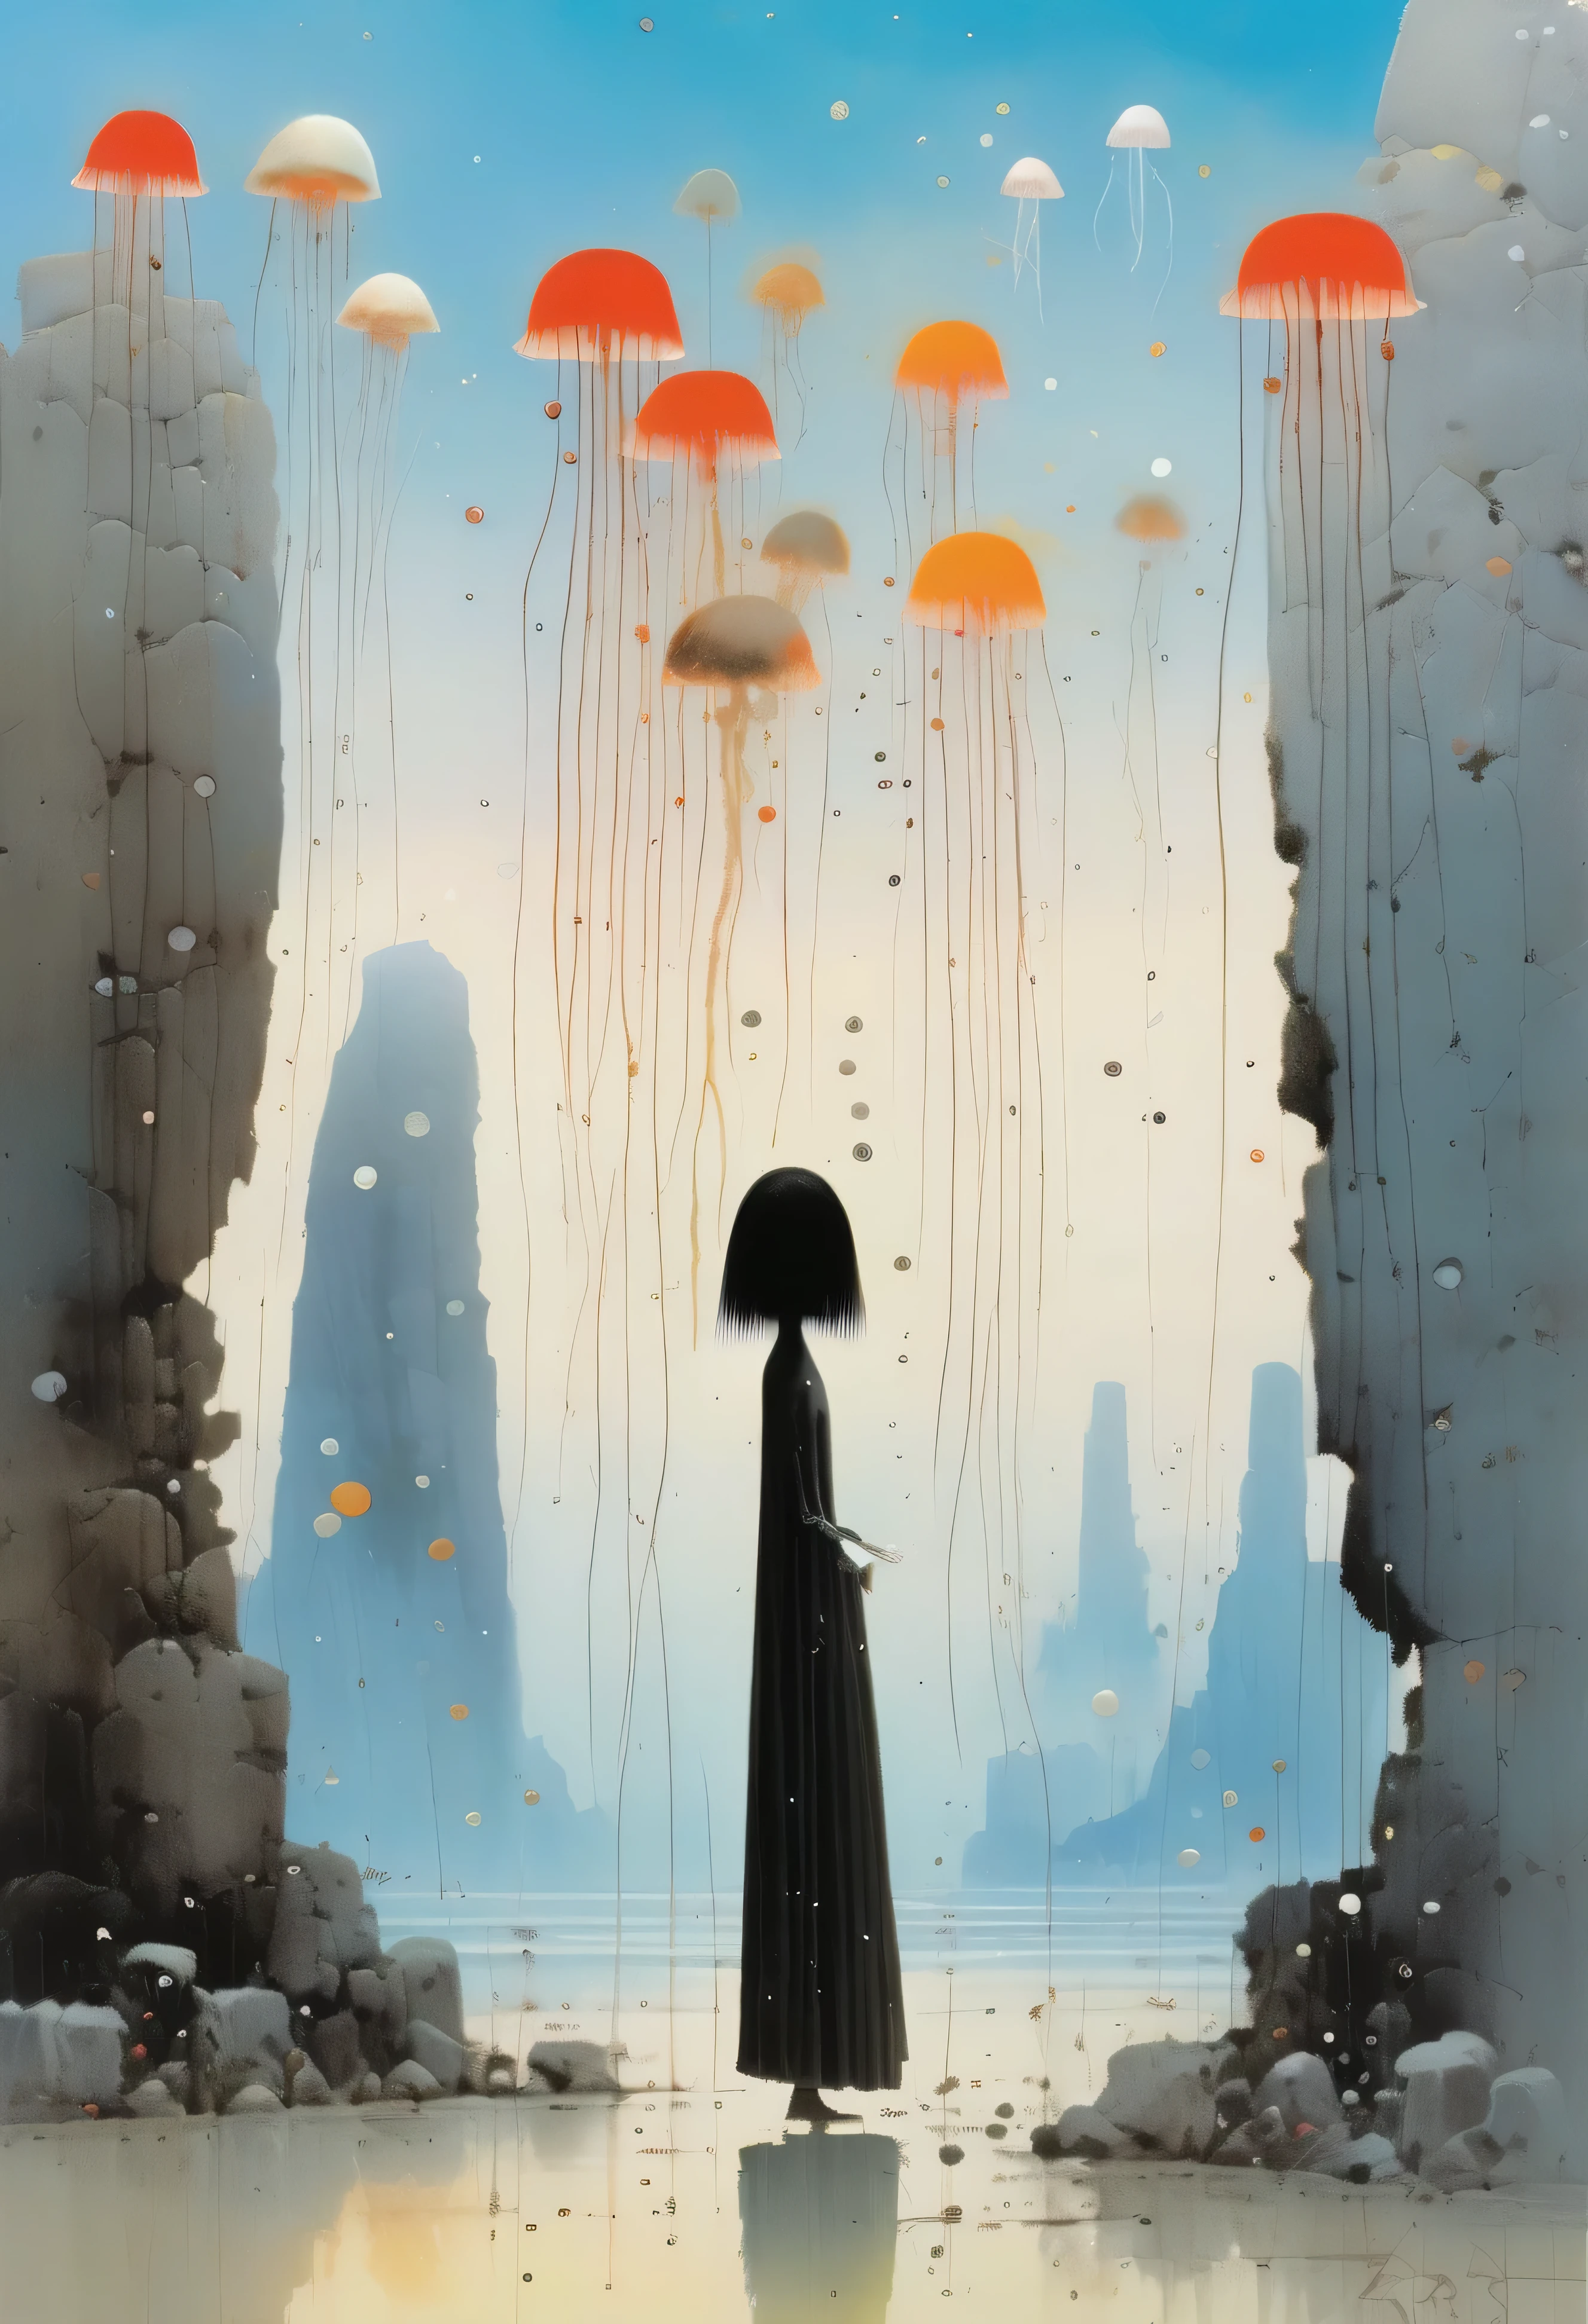 Wu Guanzhong Style painting of a woman without a face made out of stone with a light in her hand and jellyfish in the background, with a sky background, Art of Brom, magic the gathering artwork, an ultrafine detailed painting, fantasy art surreal beksinkski